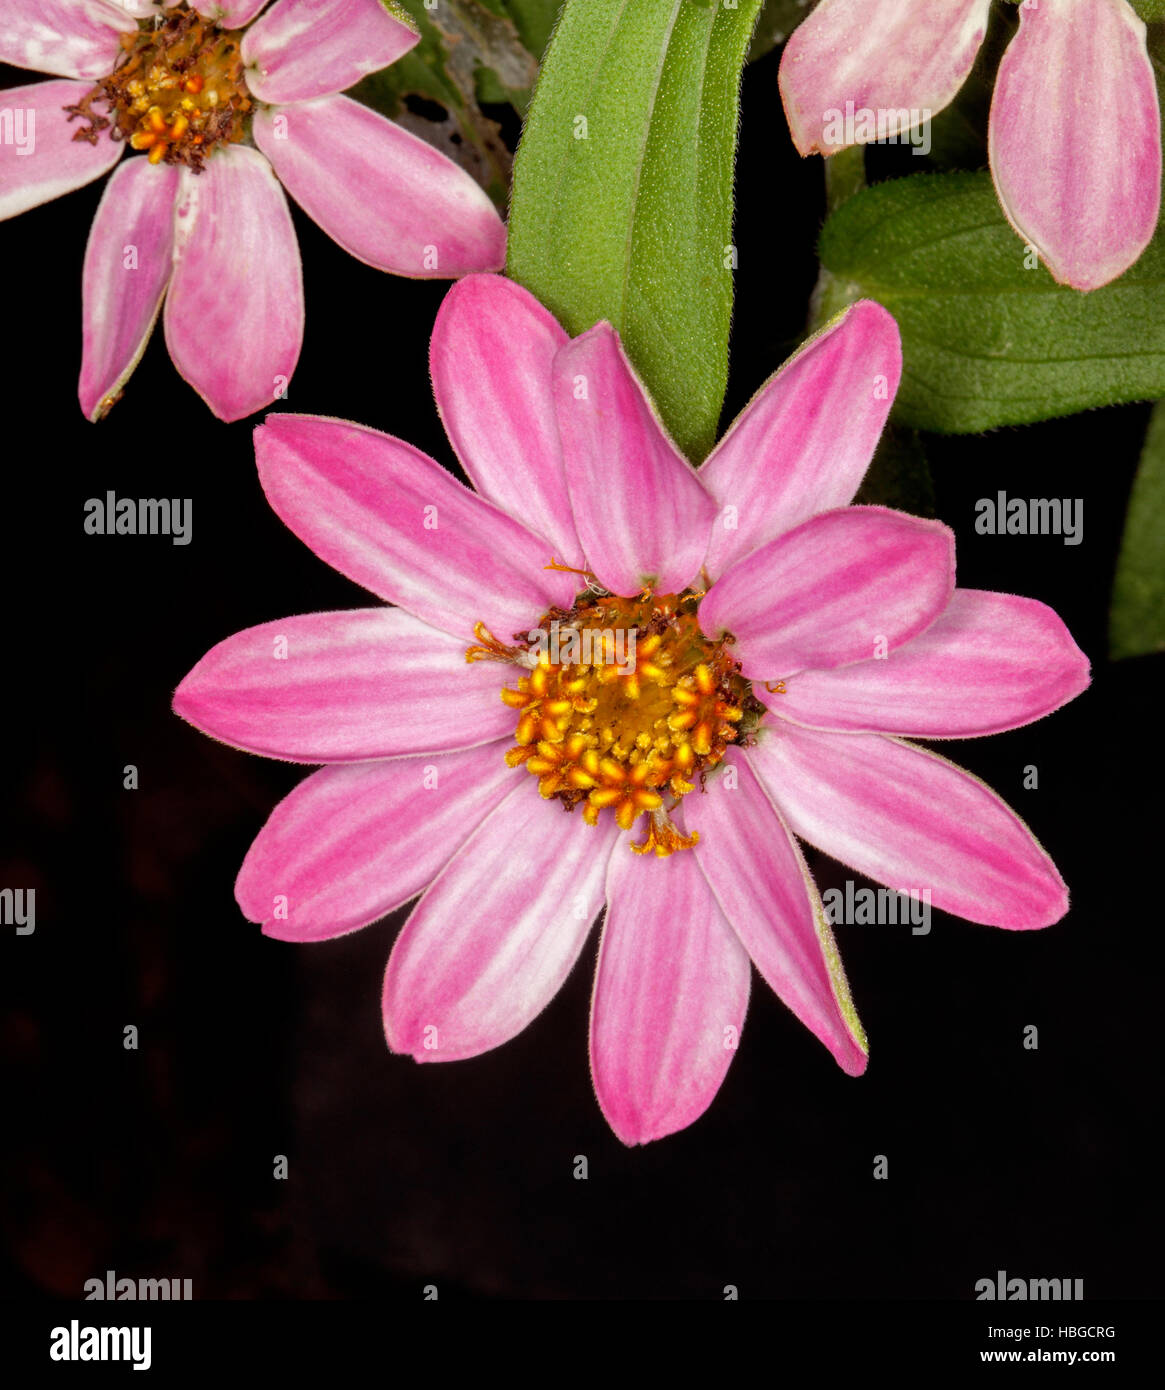 Beautiful pink flower of Zinnia linearis, perennial zinnia, with white streaks on petals, yellow centre, & emerald green leaves on black background Stock Photo